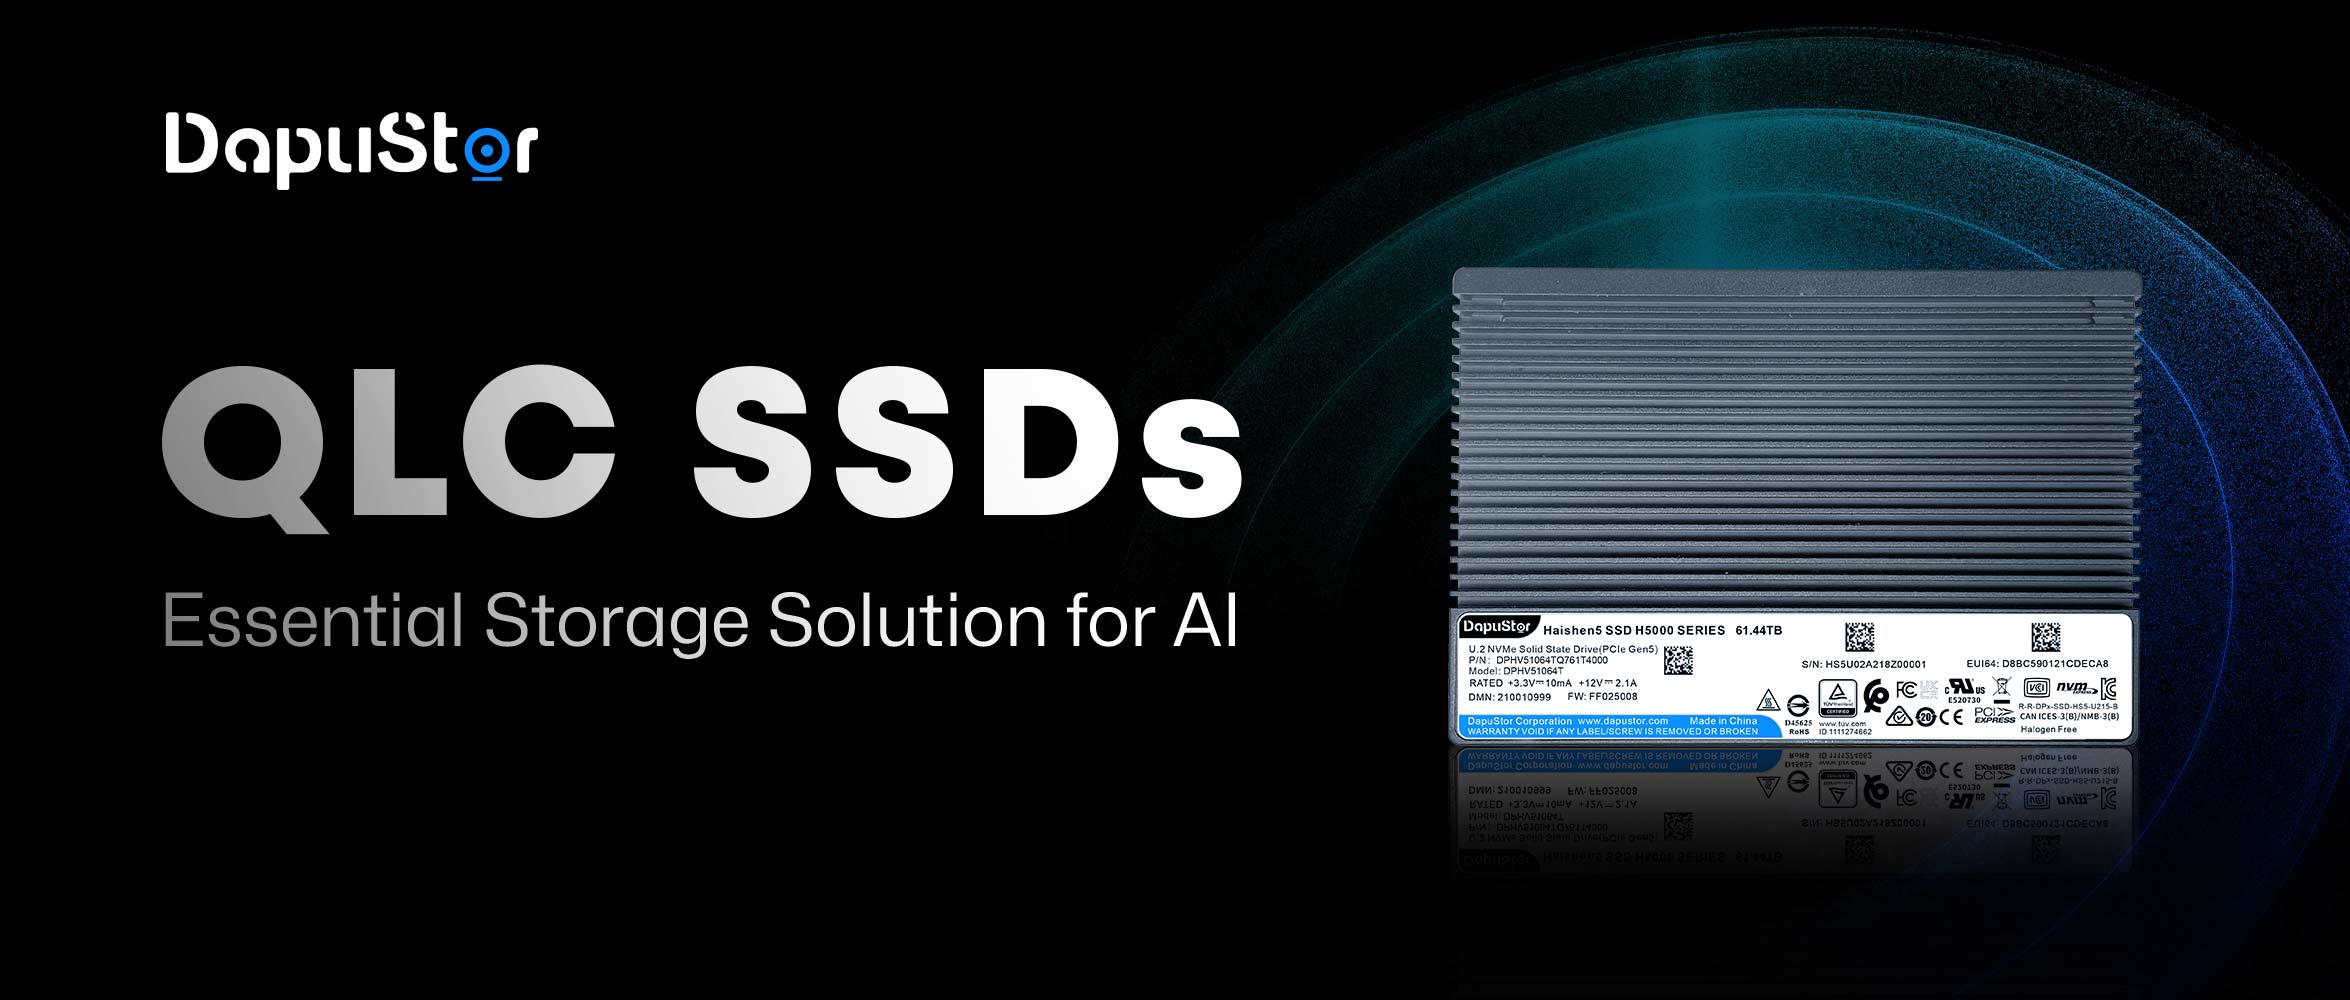 QLC SSDs: Essential Storage Solution for AI